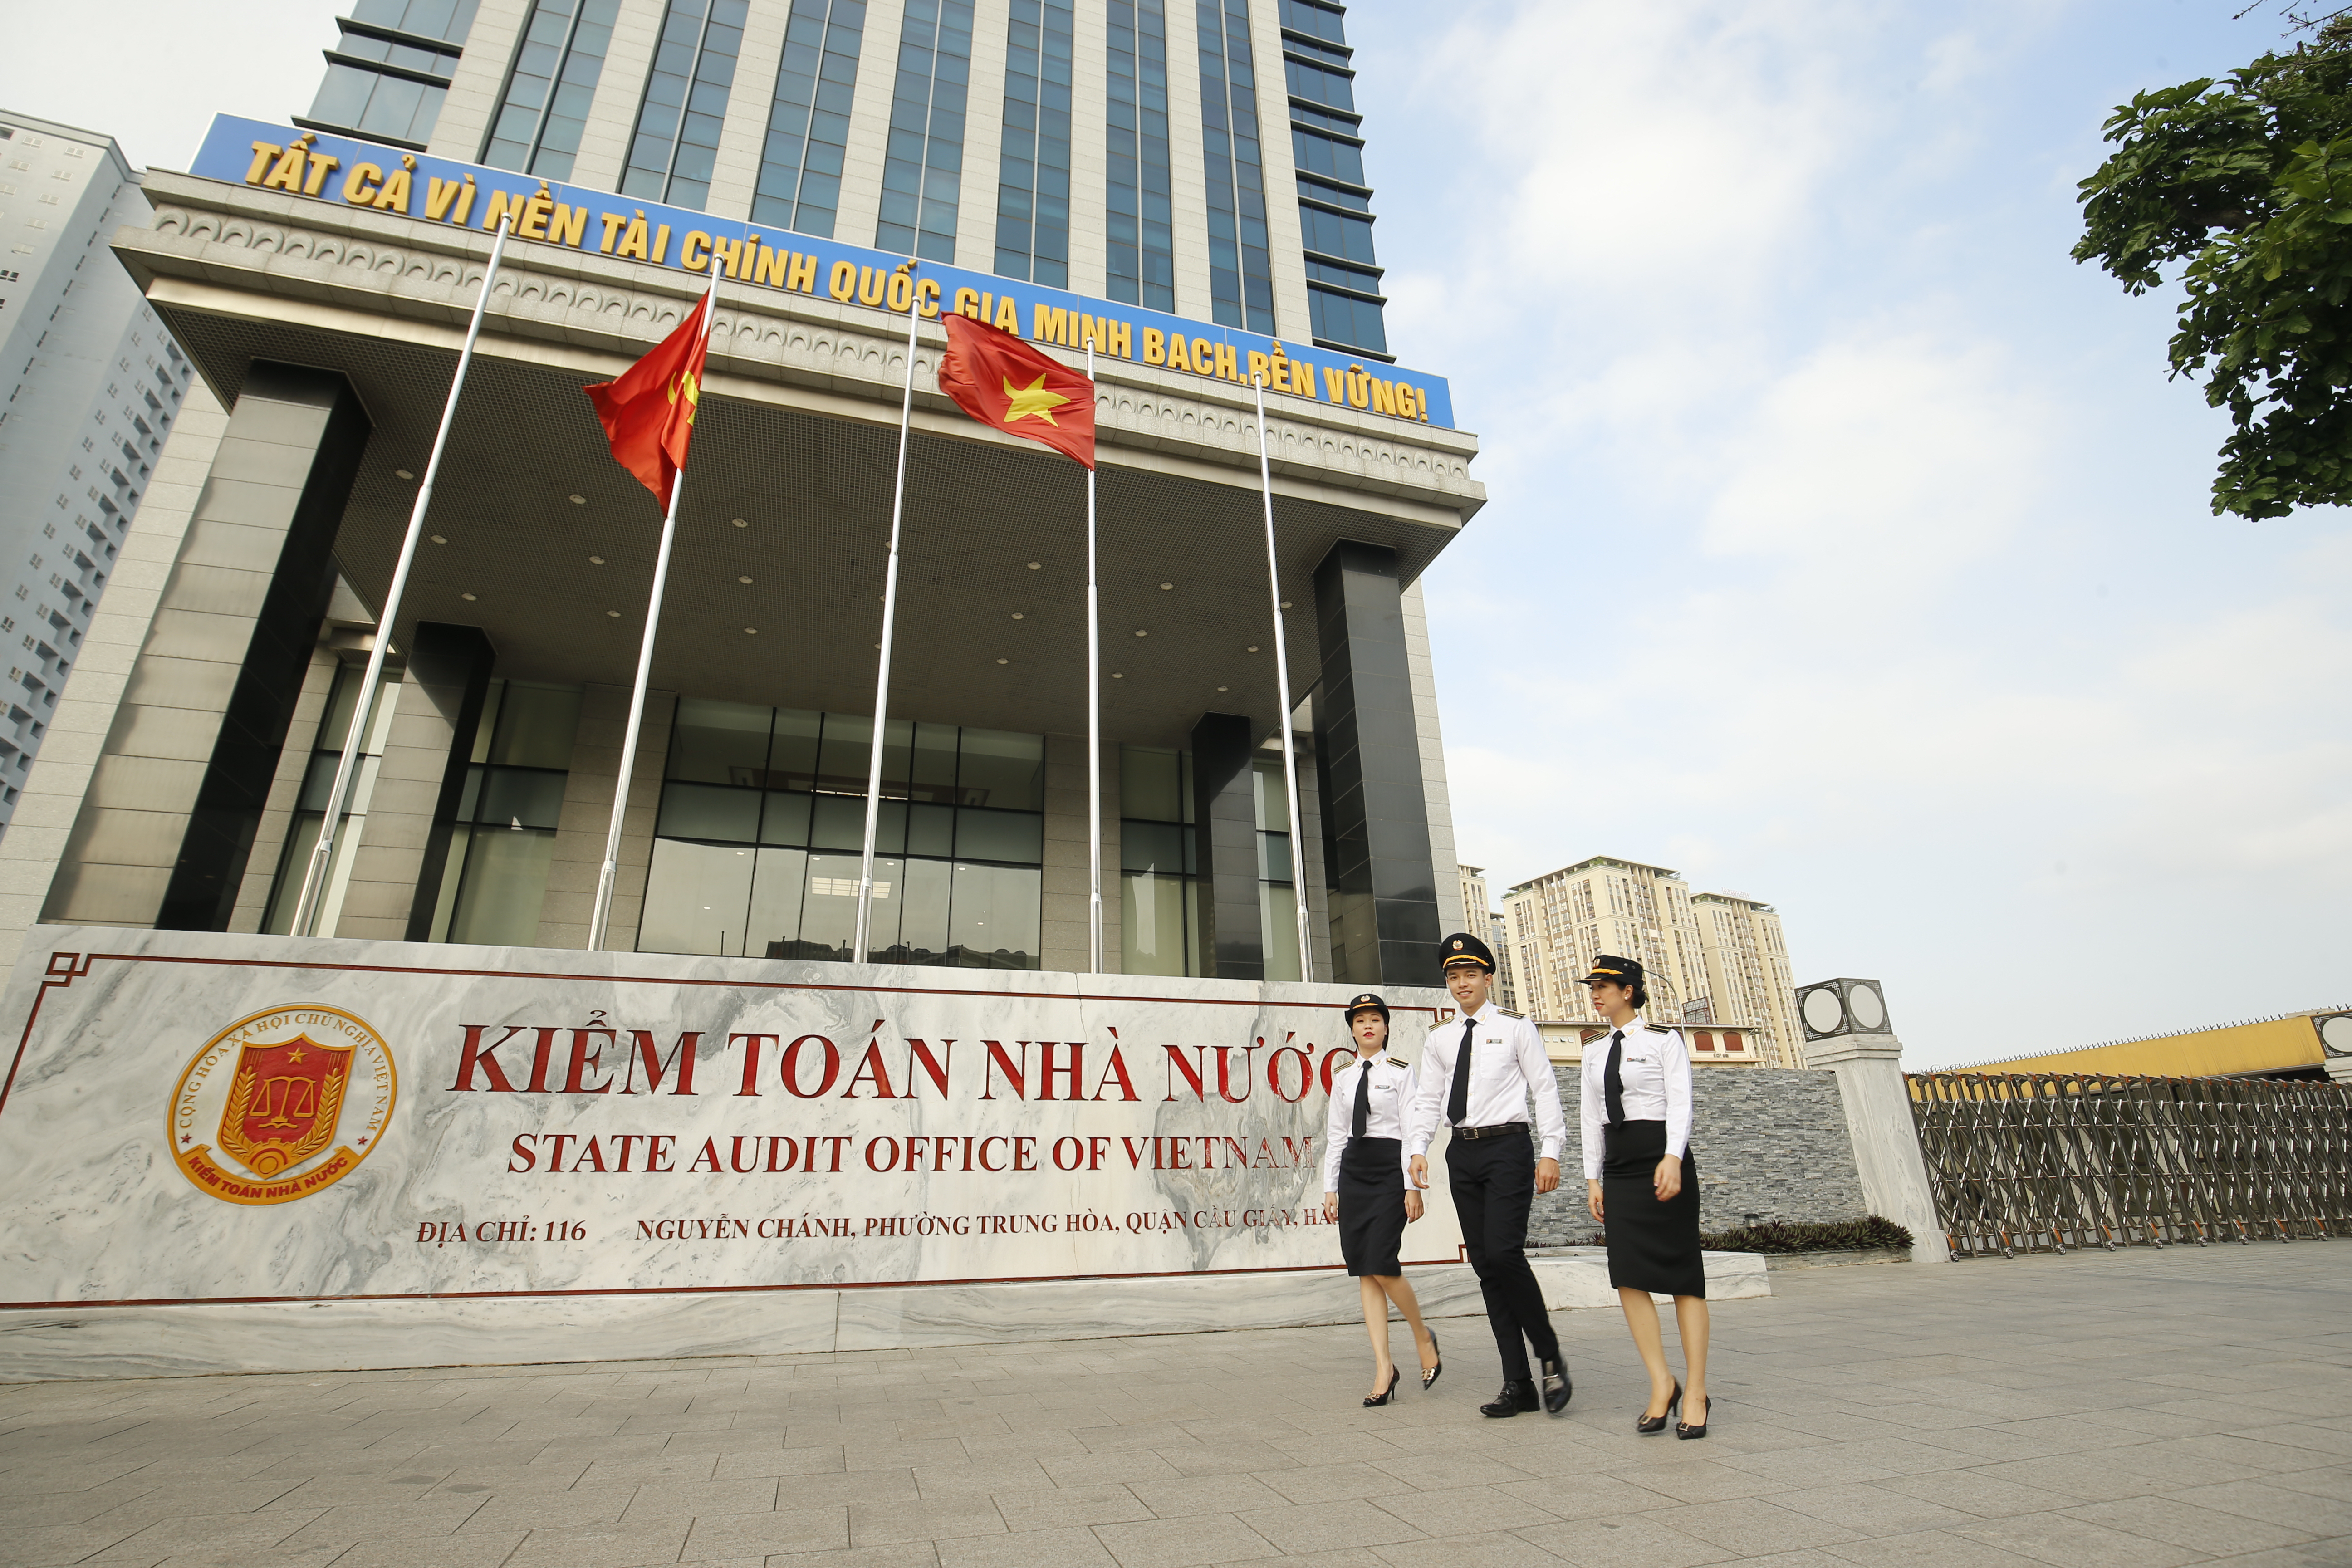 Quality control methods for State Audit Office of Vietnam